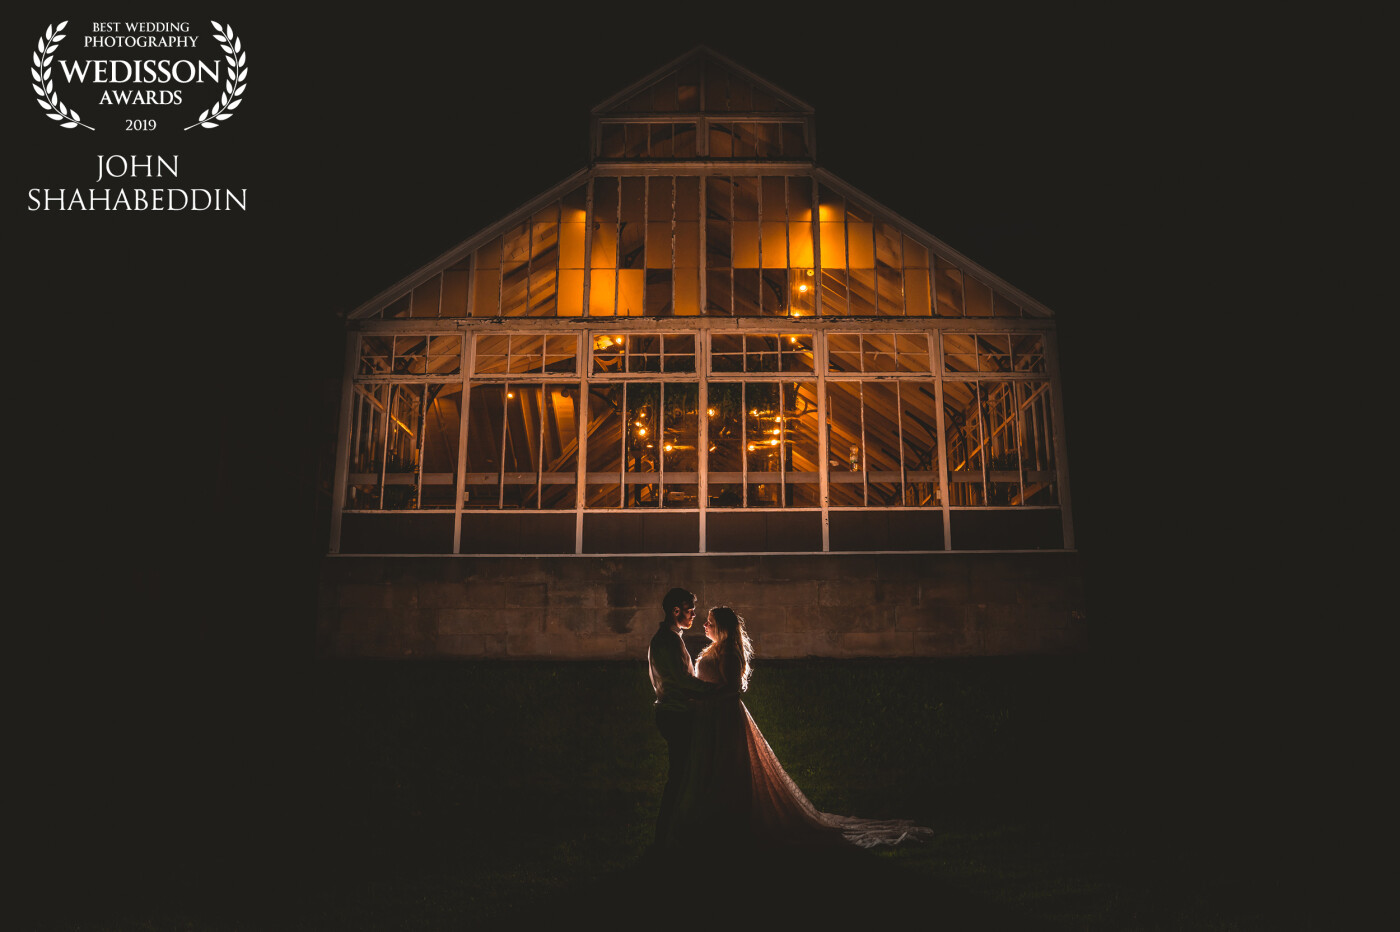 I took this booking at the beautiful Hexham Winter Gardens last year, and just knew I needed to get this nighttime shot of the wonderful botanical glasshouse where the celebrations took place, all lit up with the couple in the foreground. I love the warmth and drama of the shot, and the couple did too!